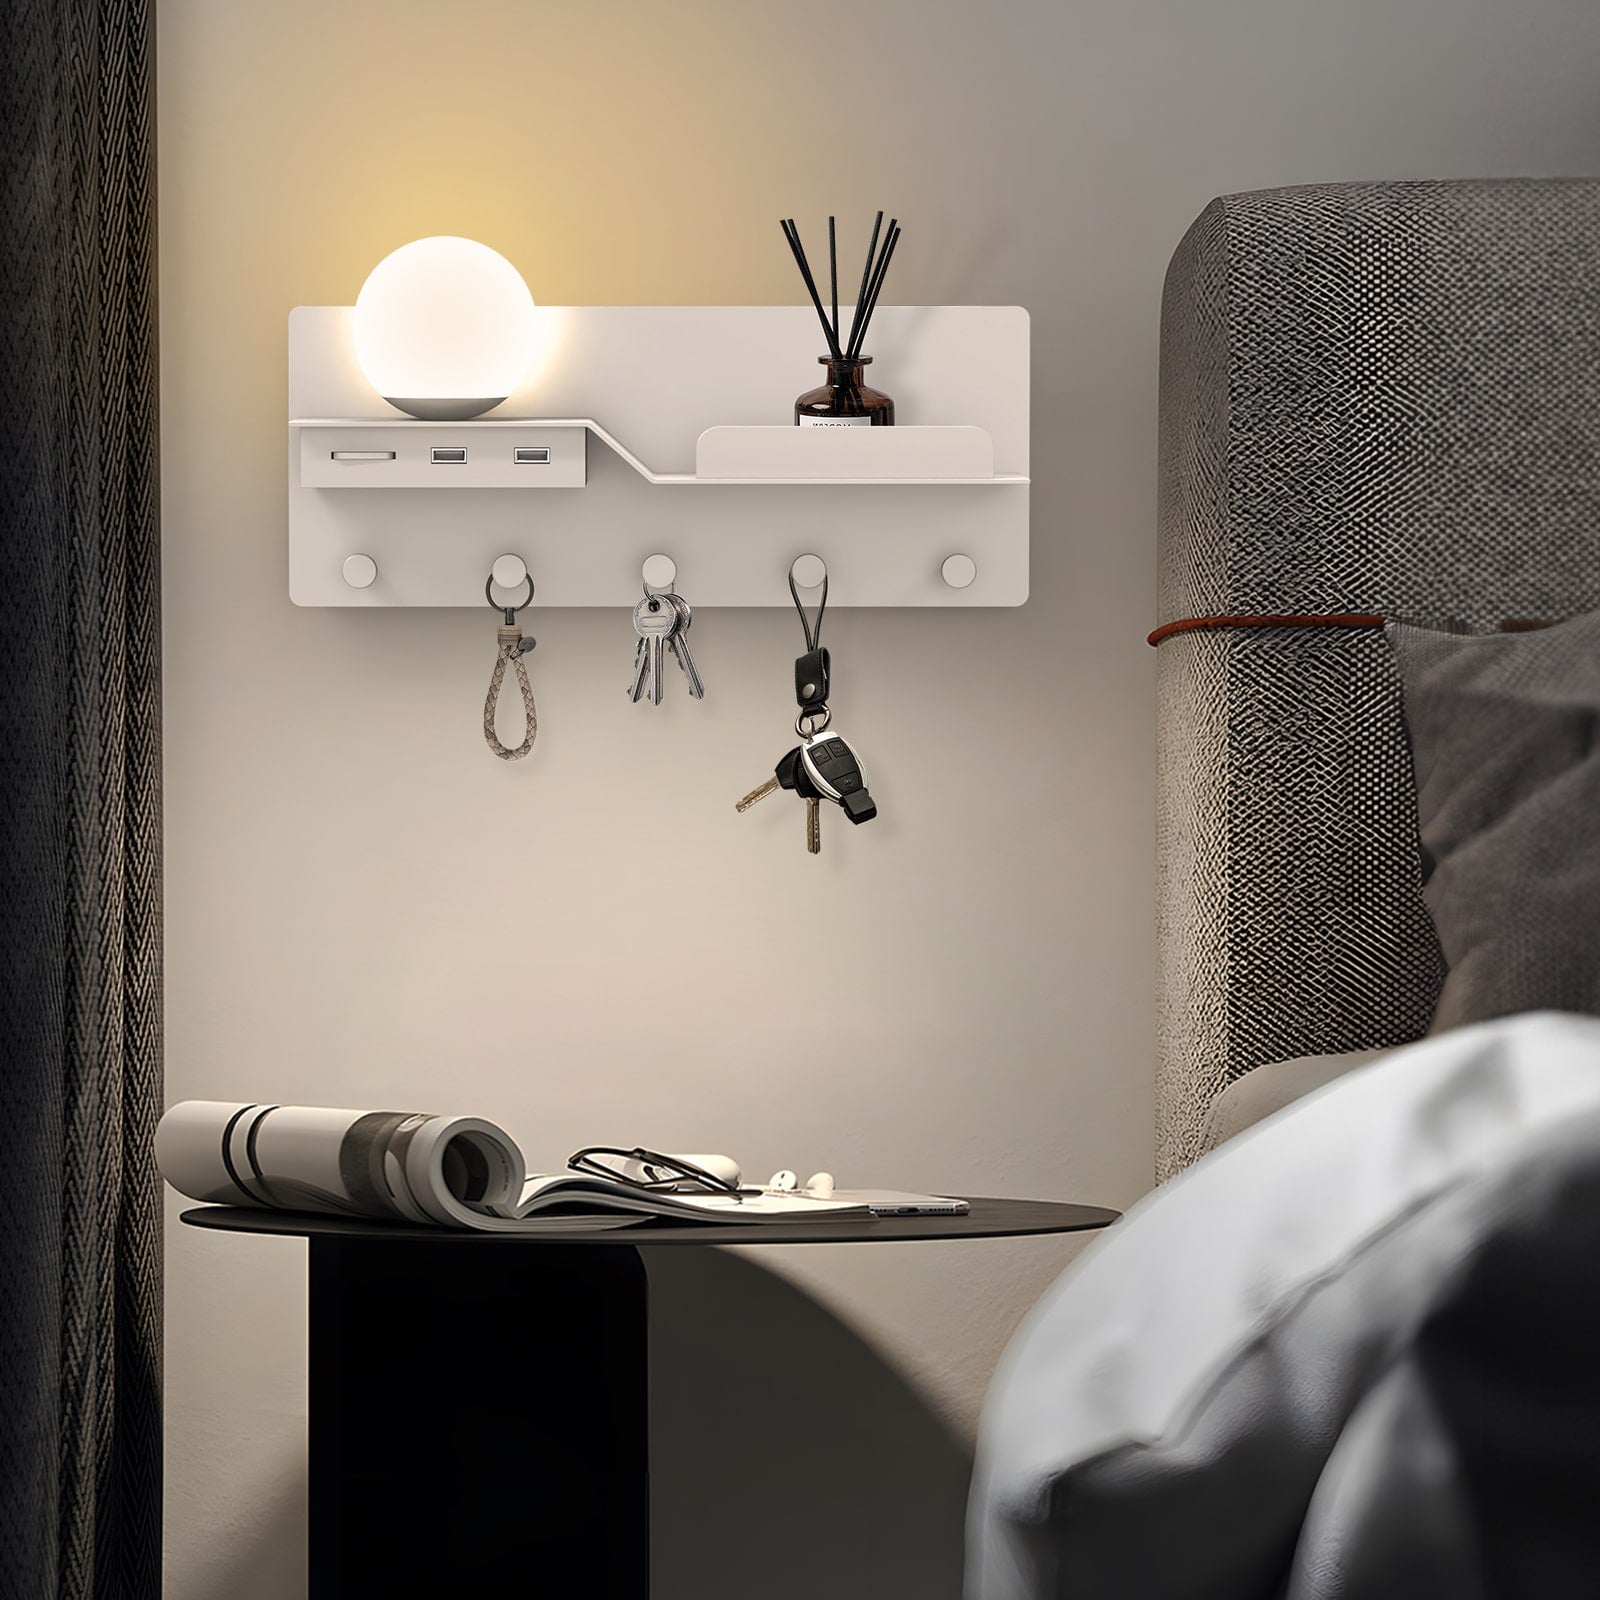 M06 Multifunctional Modern Wall Sconce with Key Holder 6W Romantic Ball Light